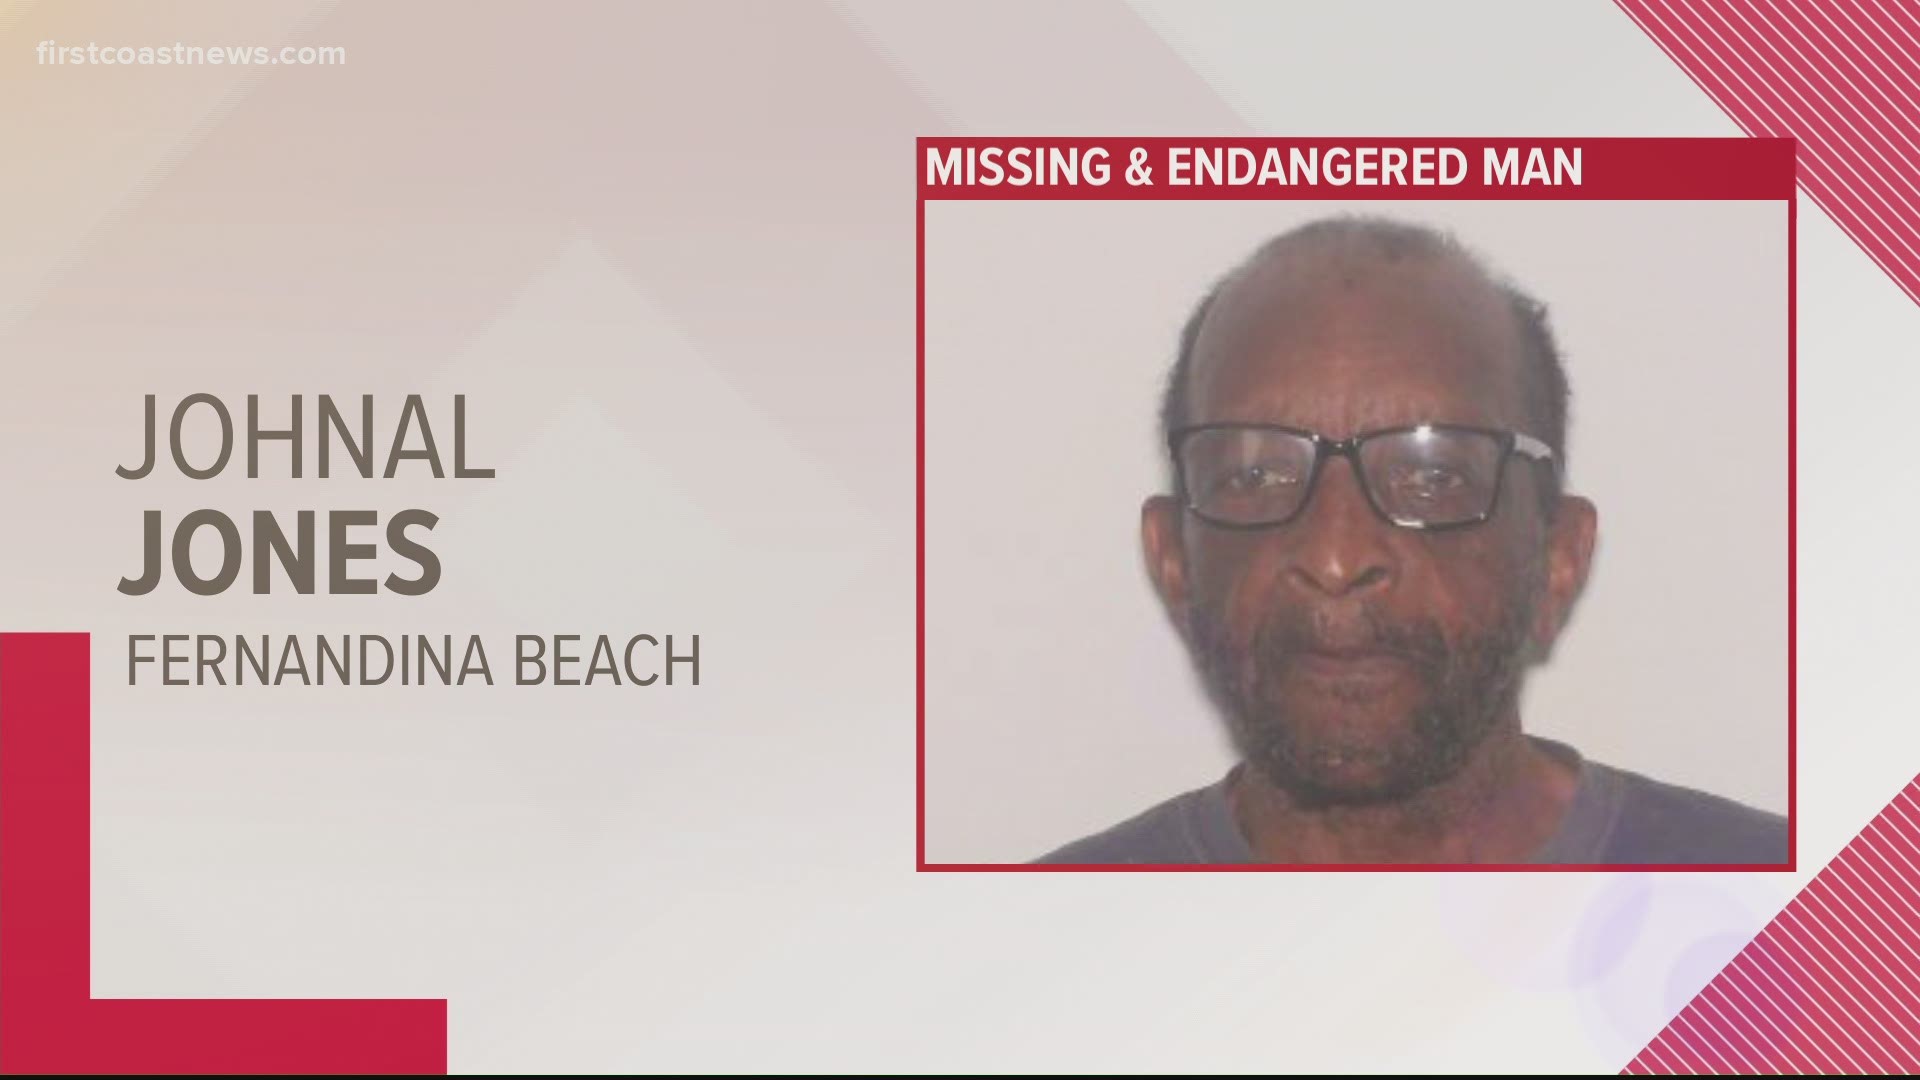 Johnal Jones, 77, was last seen walking in the 400 block of South 9th Street at around 9 p.m. Friday, according to police.